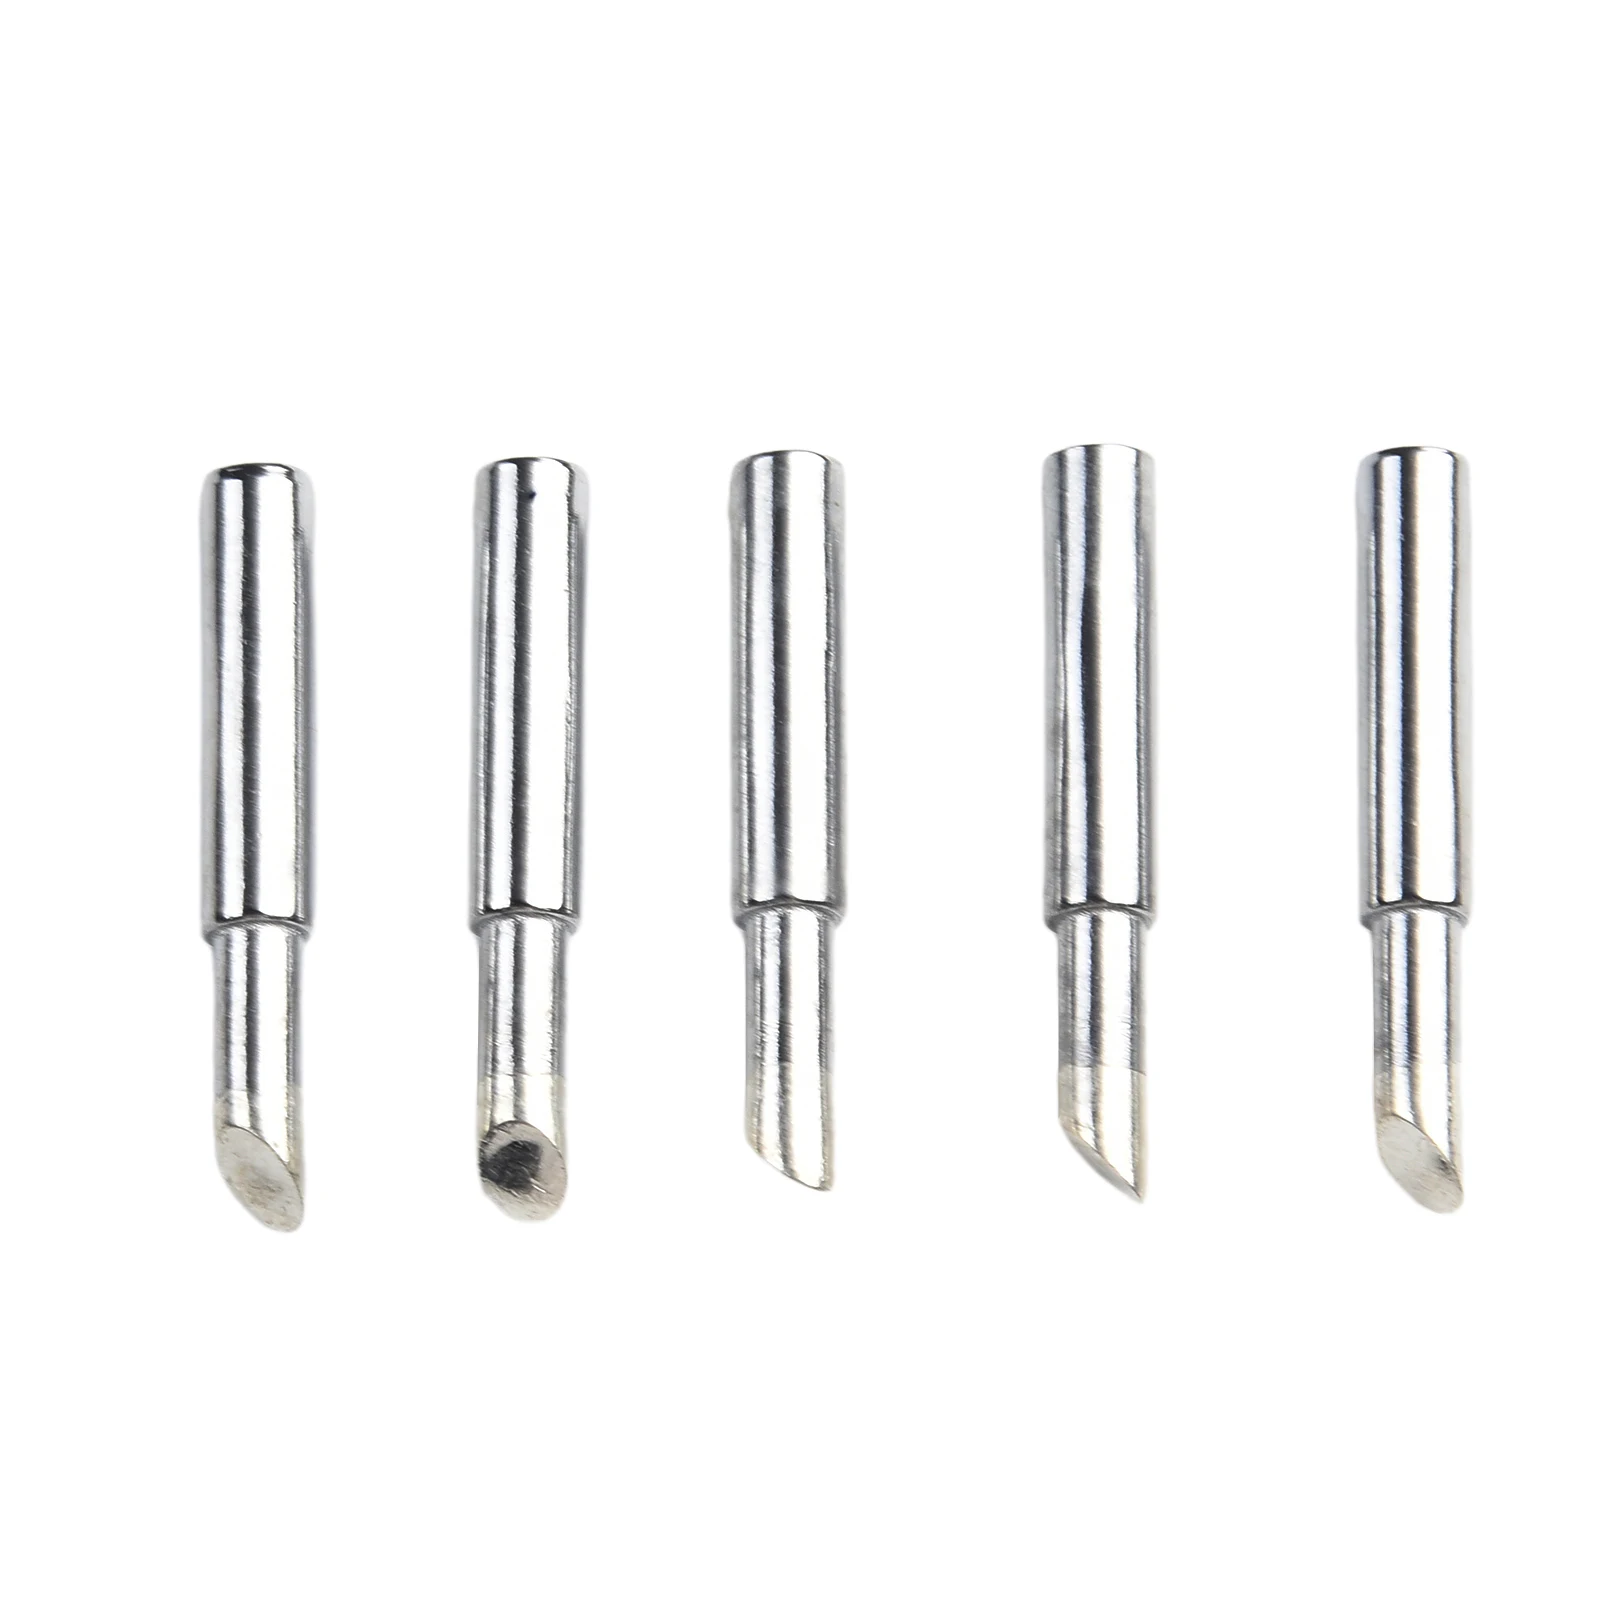 

5Pcs 900M-T-5C Silver Soldering Iron Tip For Welding Occasions Large Heat Thick Terminals Circuit Boards Soldering Tool Part